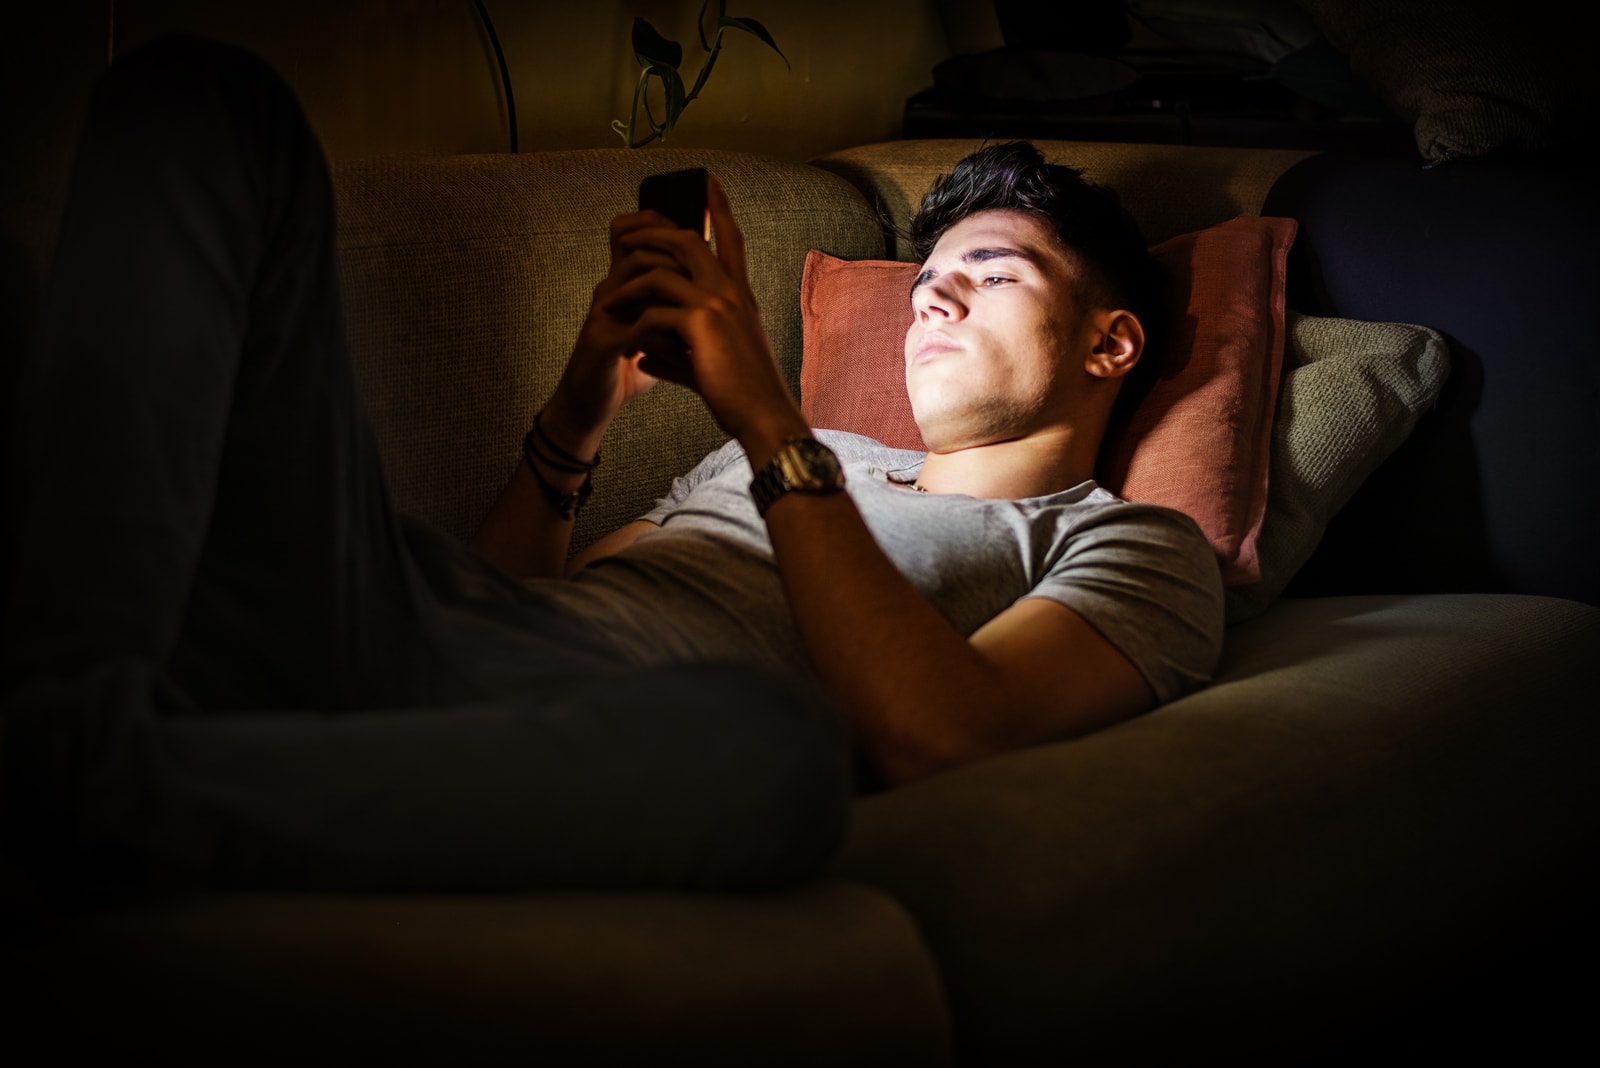 the young man is lying on the couch and using a smartphone